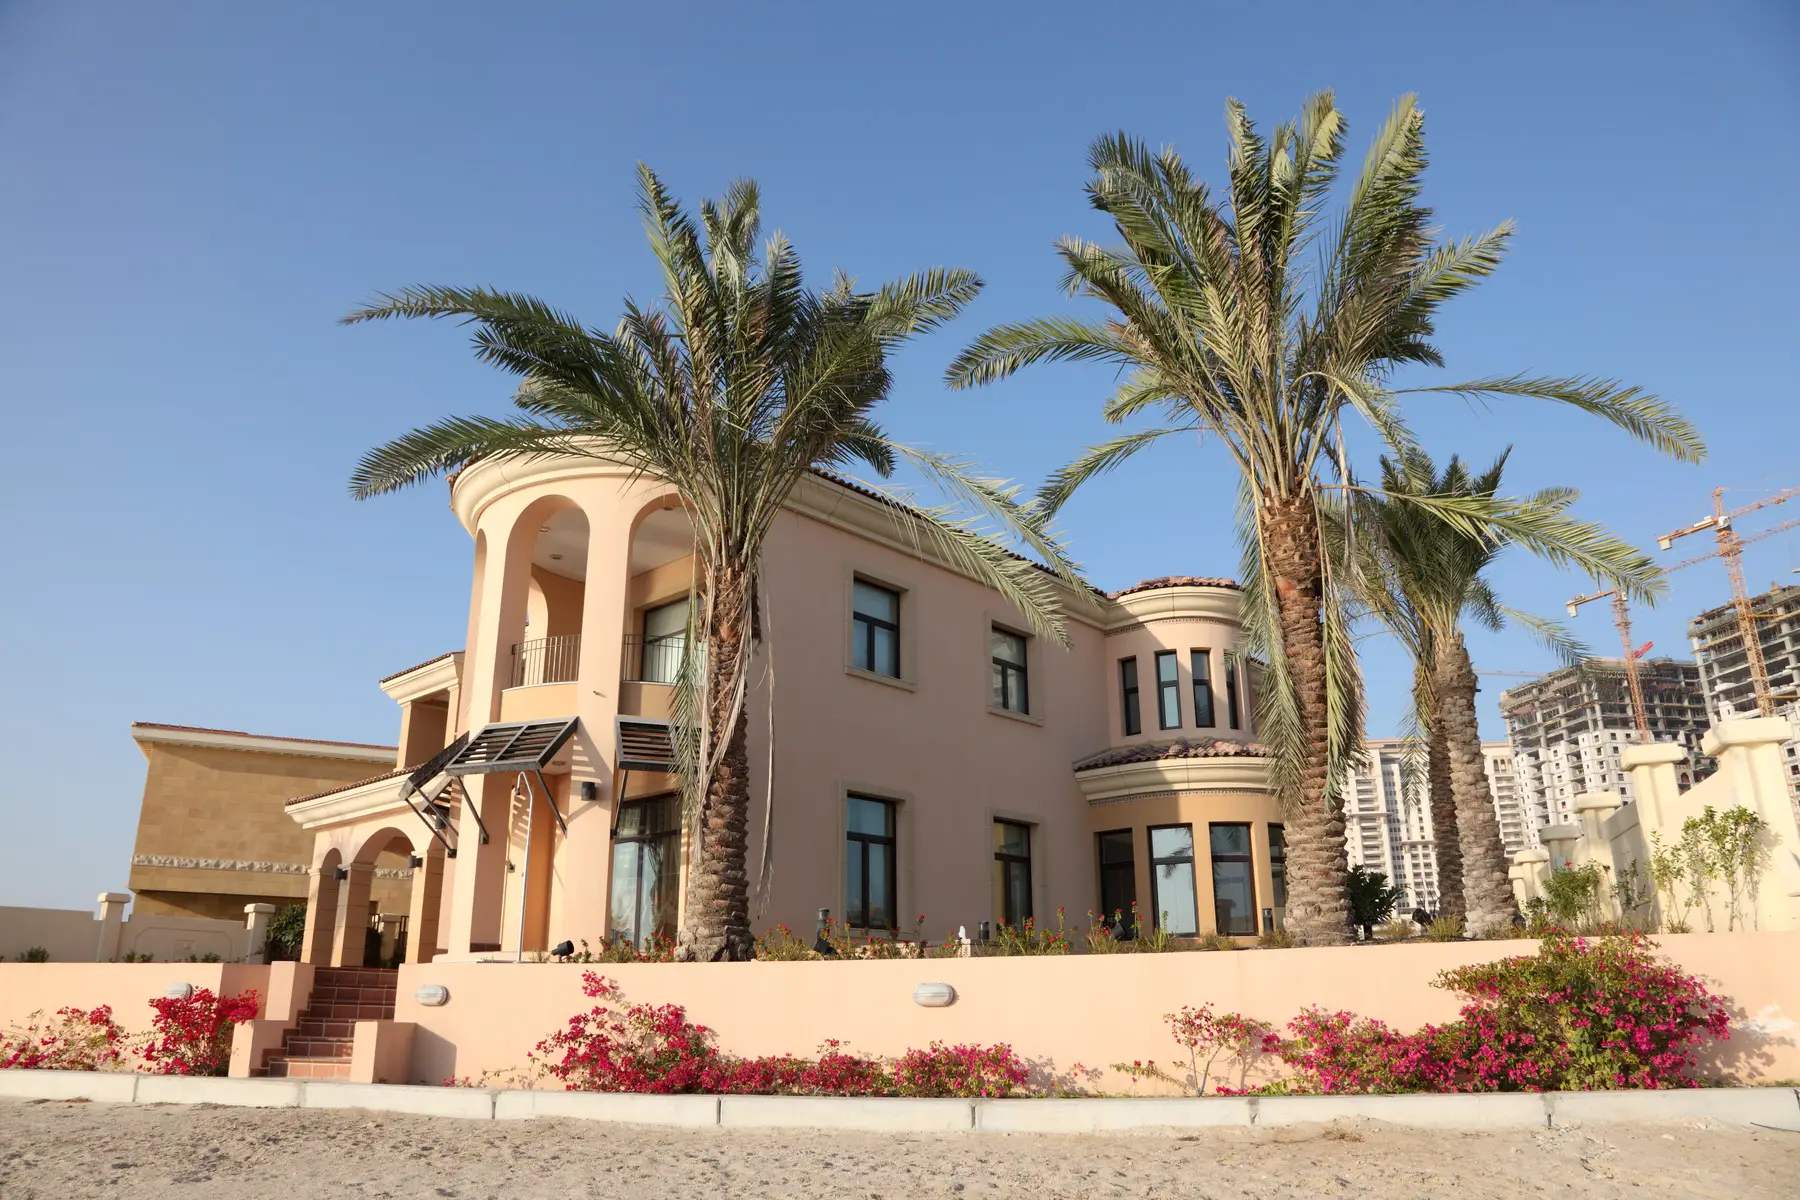 Typical luxury home in Qatar